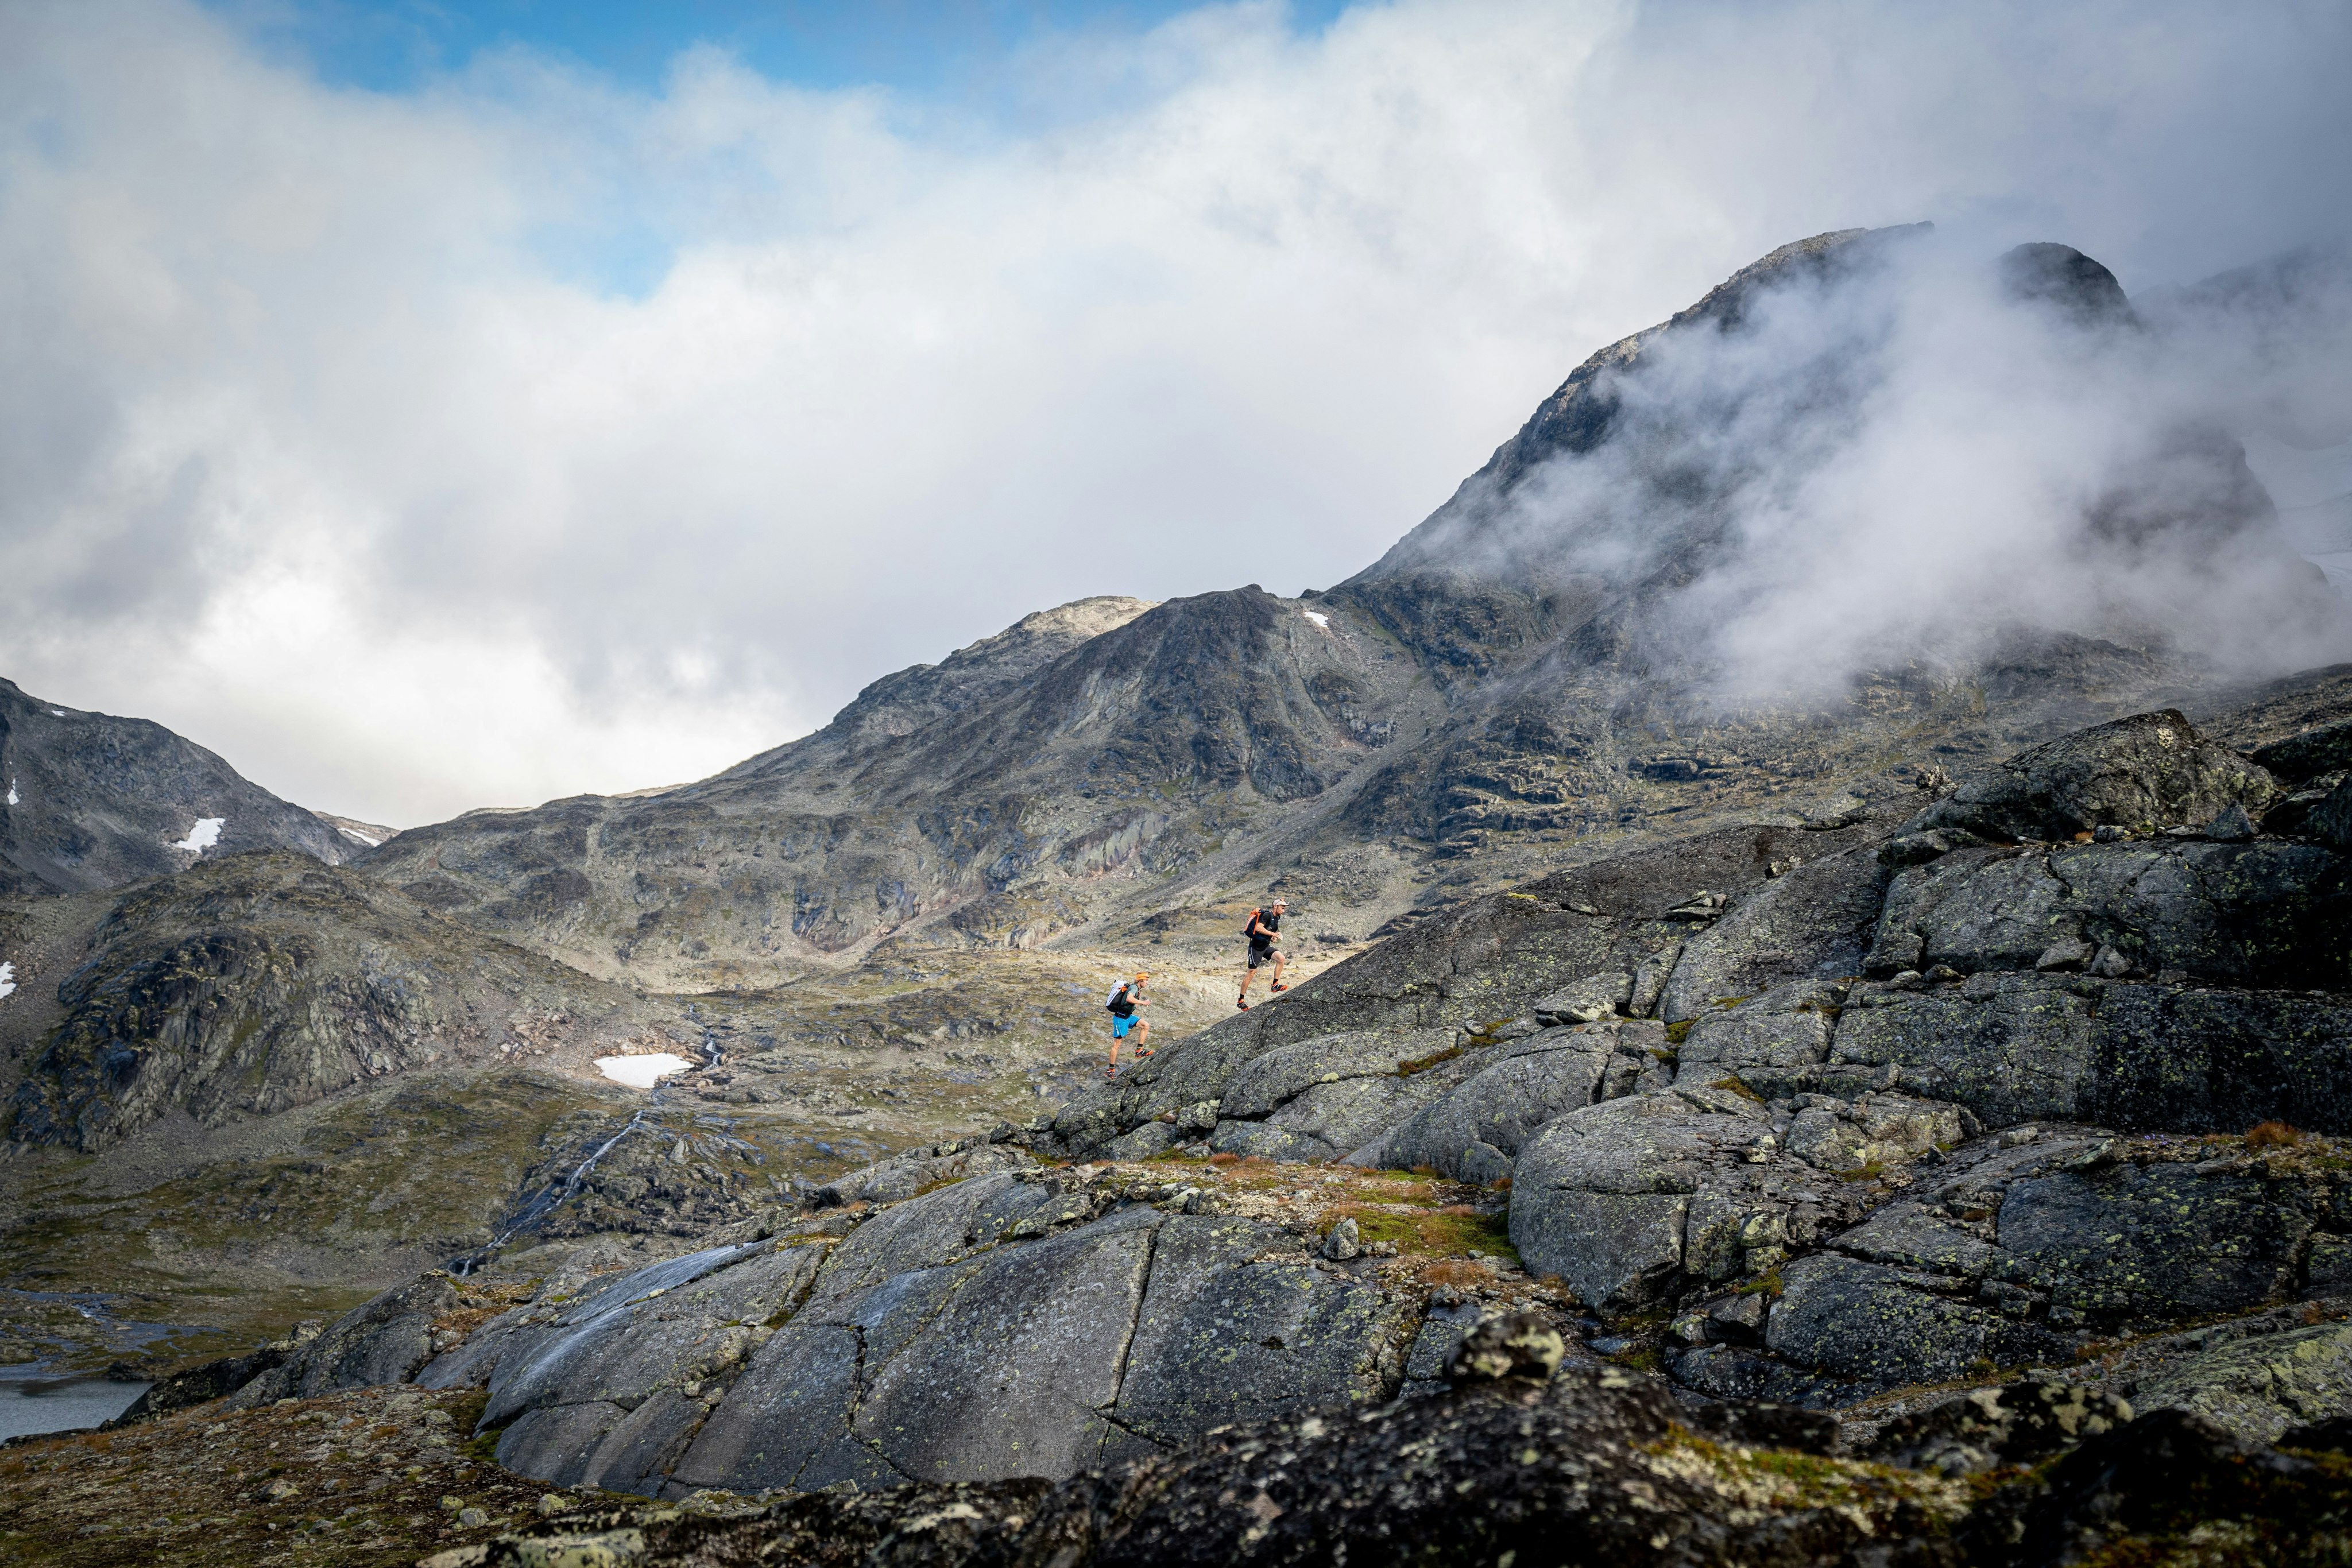 Two hikers equipped with Mammut gear traverse rugged, rocky terrain in a mist-covered mountainous landscape under a partly cloudy sky.